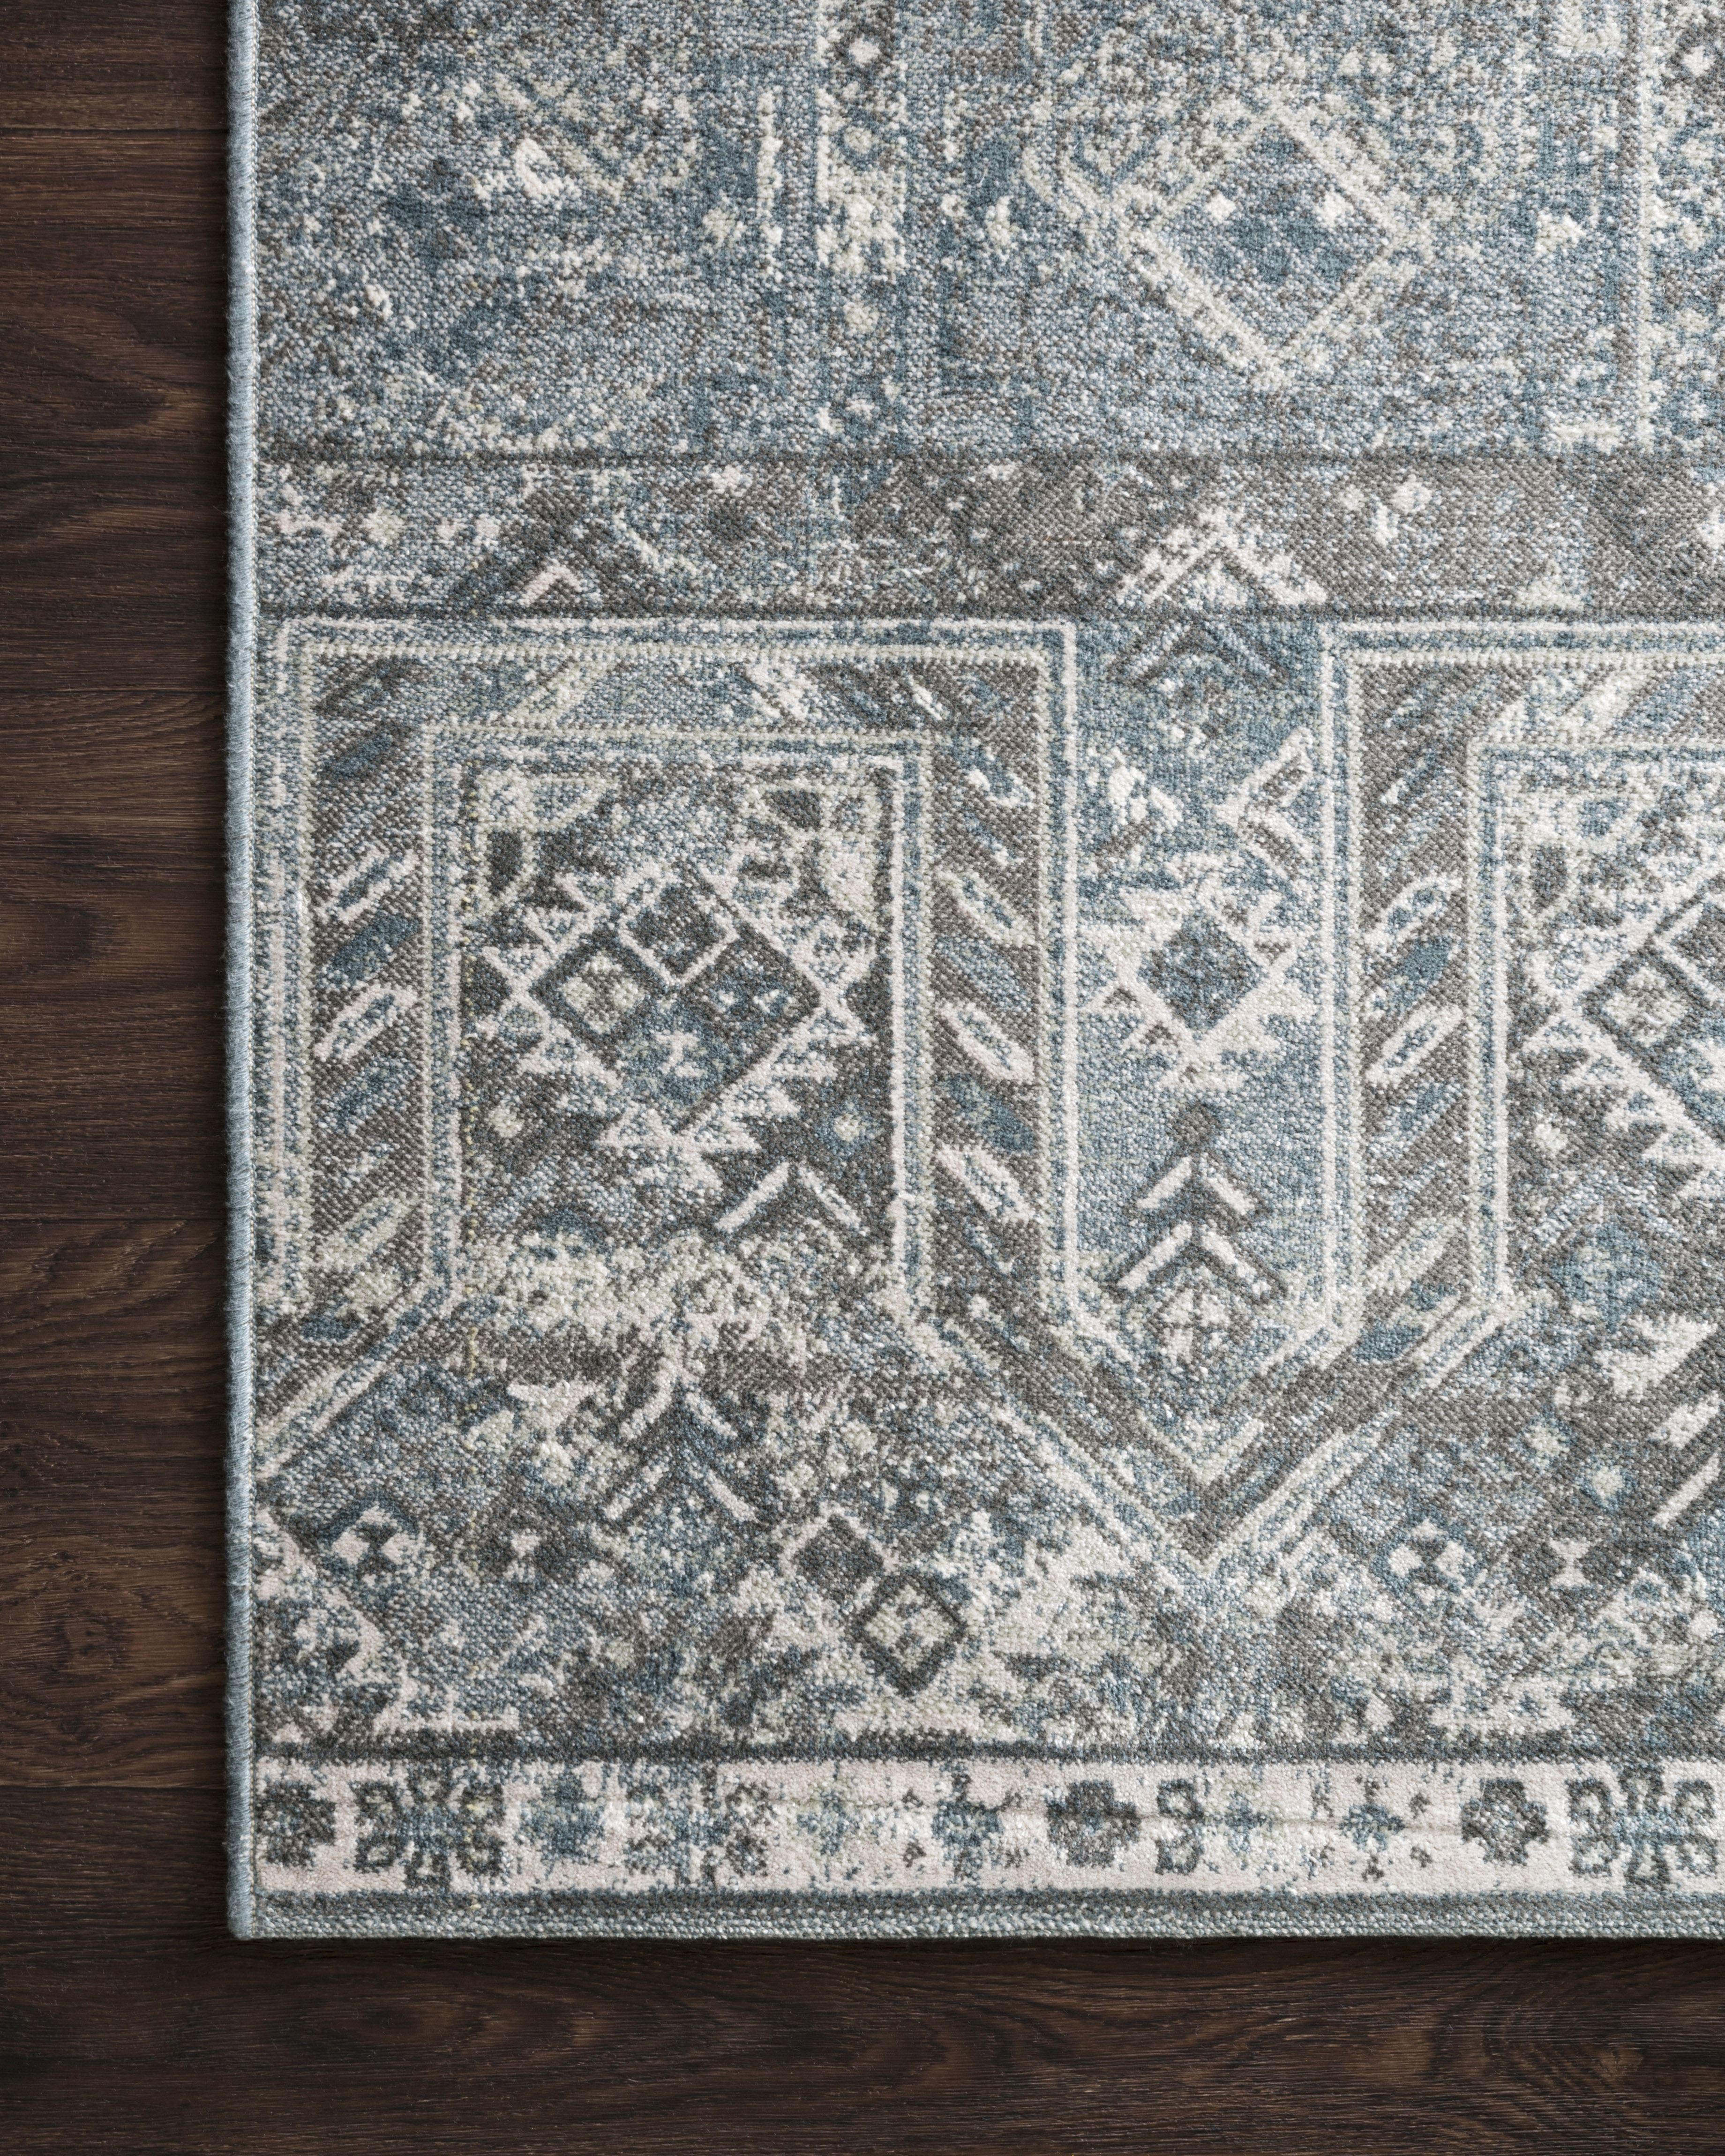 Griffin Rug, 7'6" x 10'5", Gray & Blue - Image 2